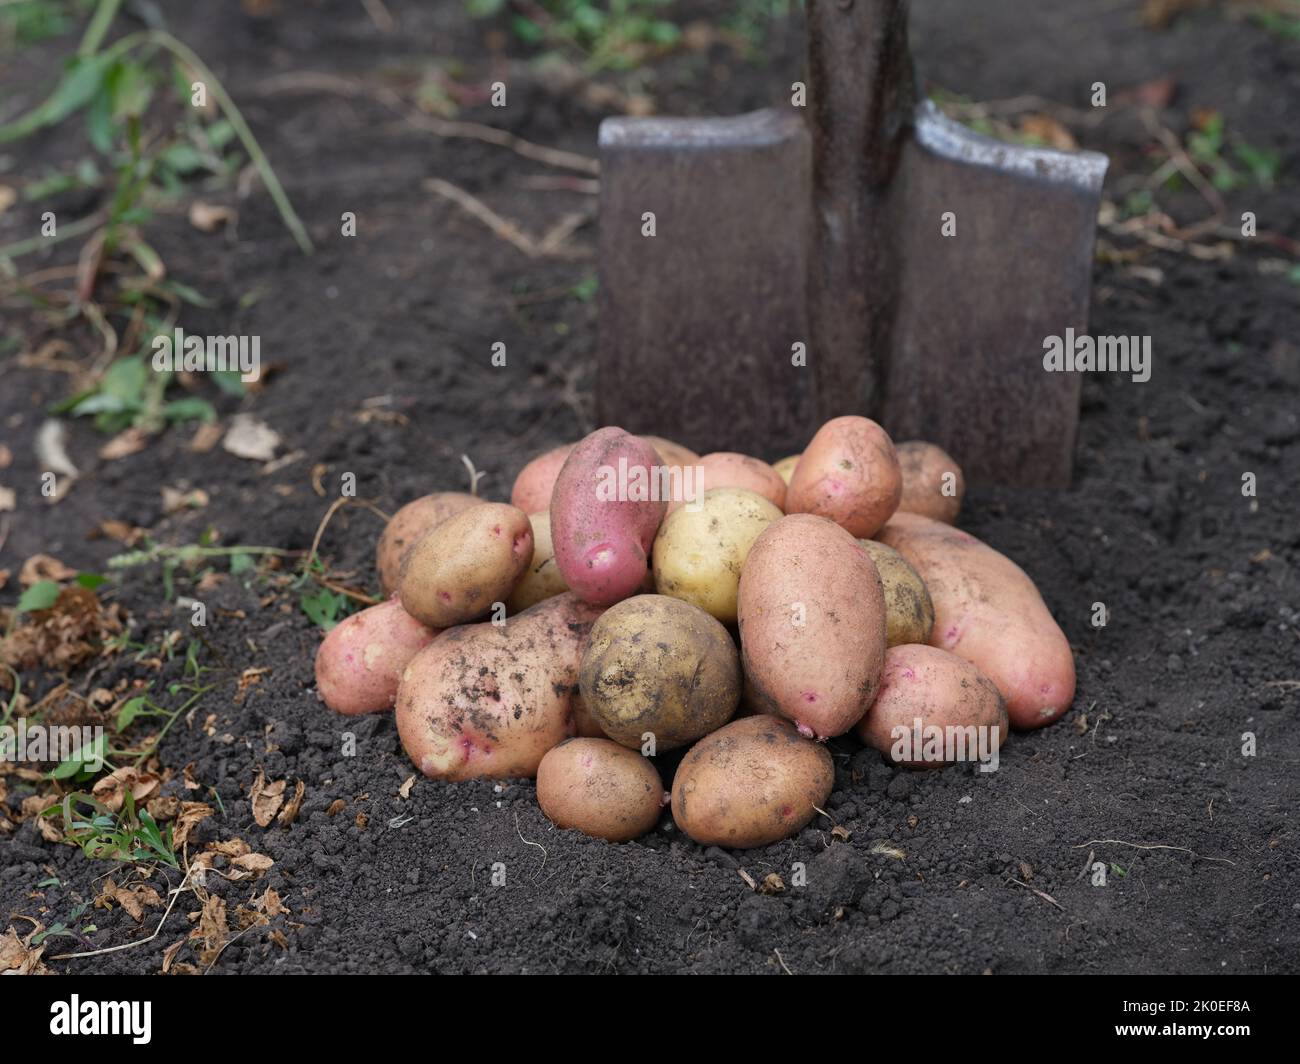 A pile of potatoes lying on the ground in front of a shovel. Close up. Stock Photo